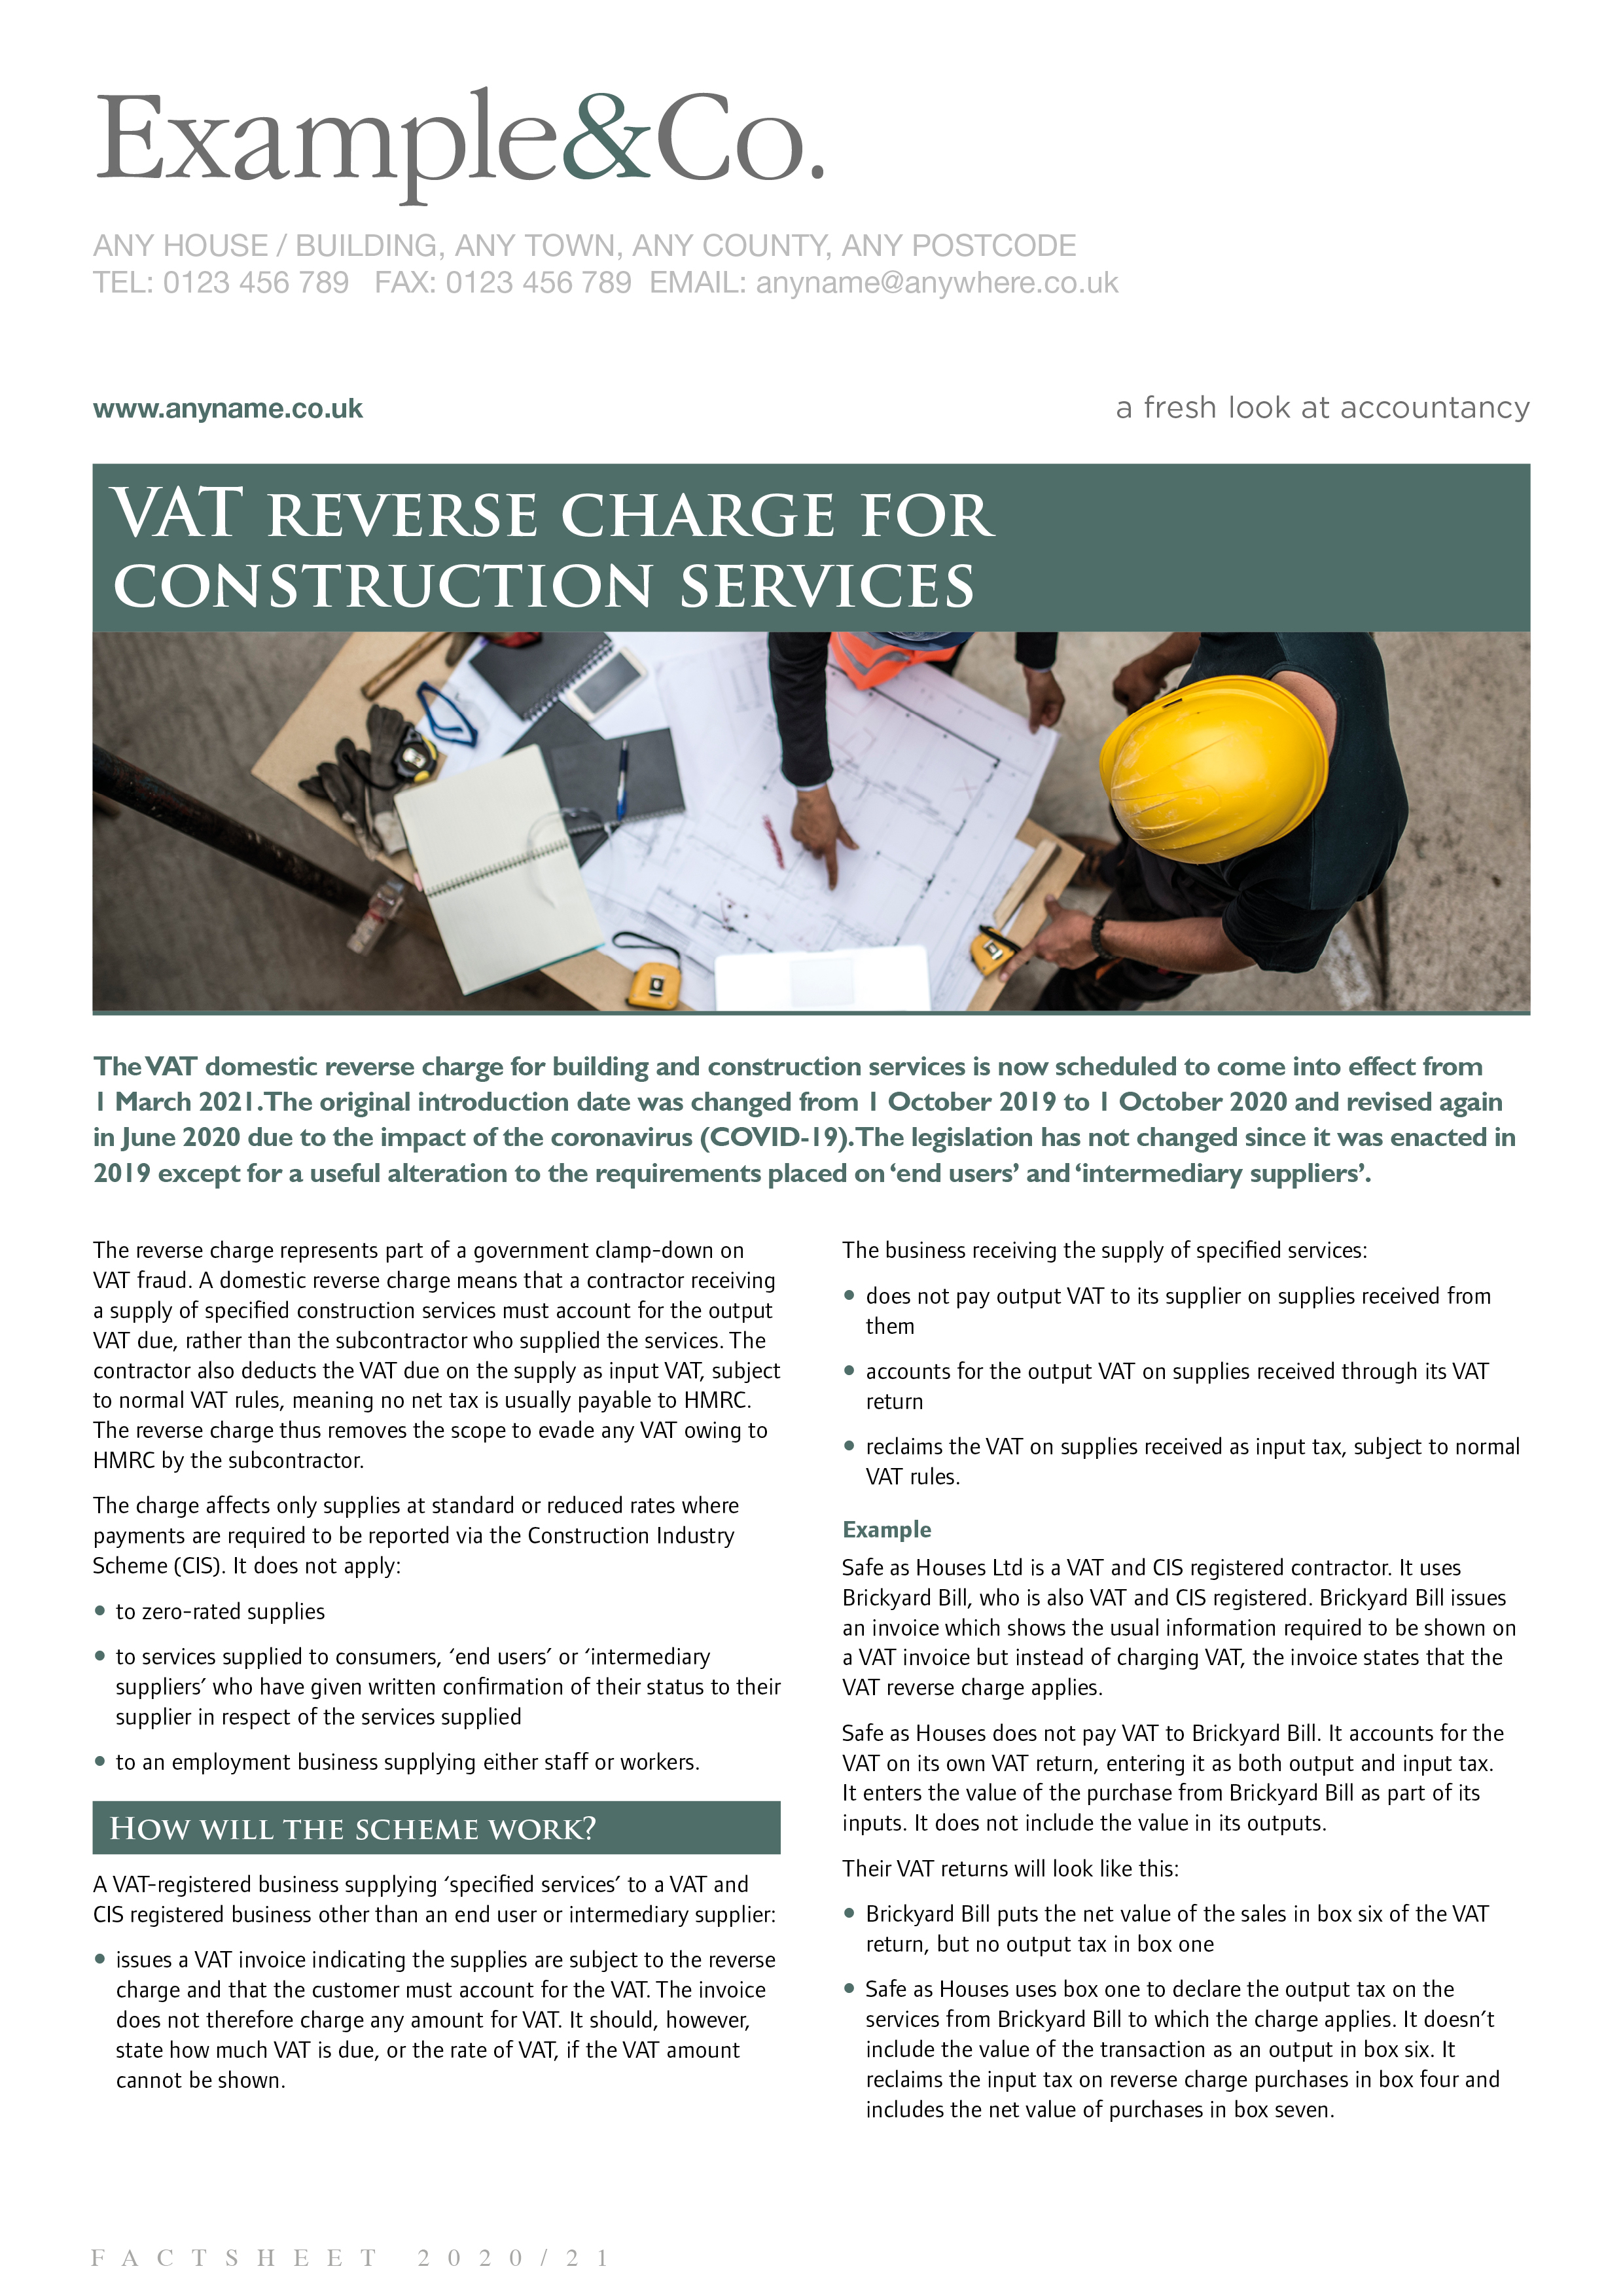 VAT reverse charge for construction services